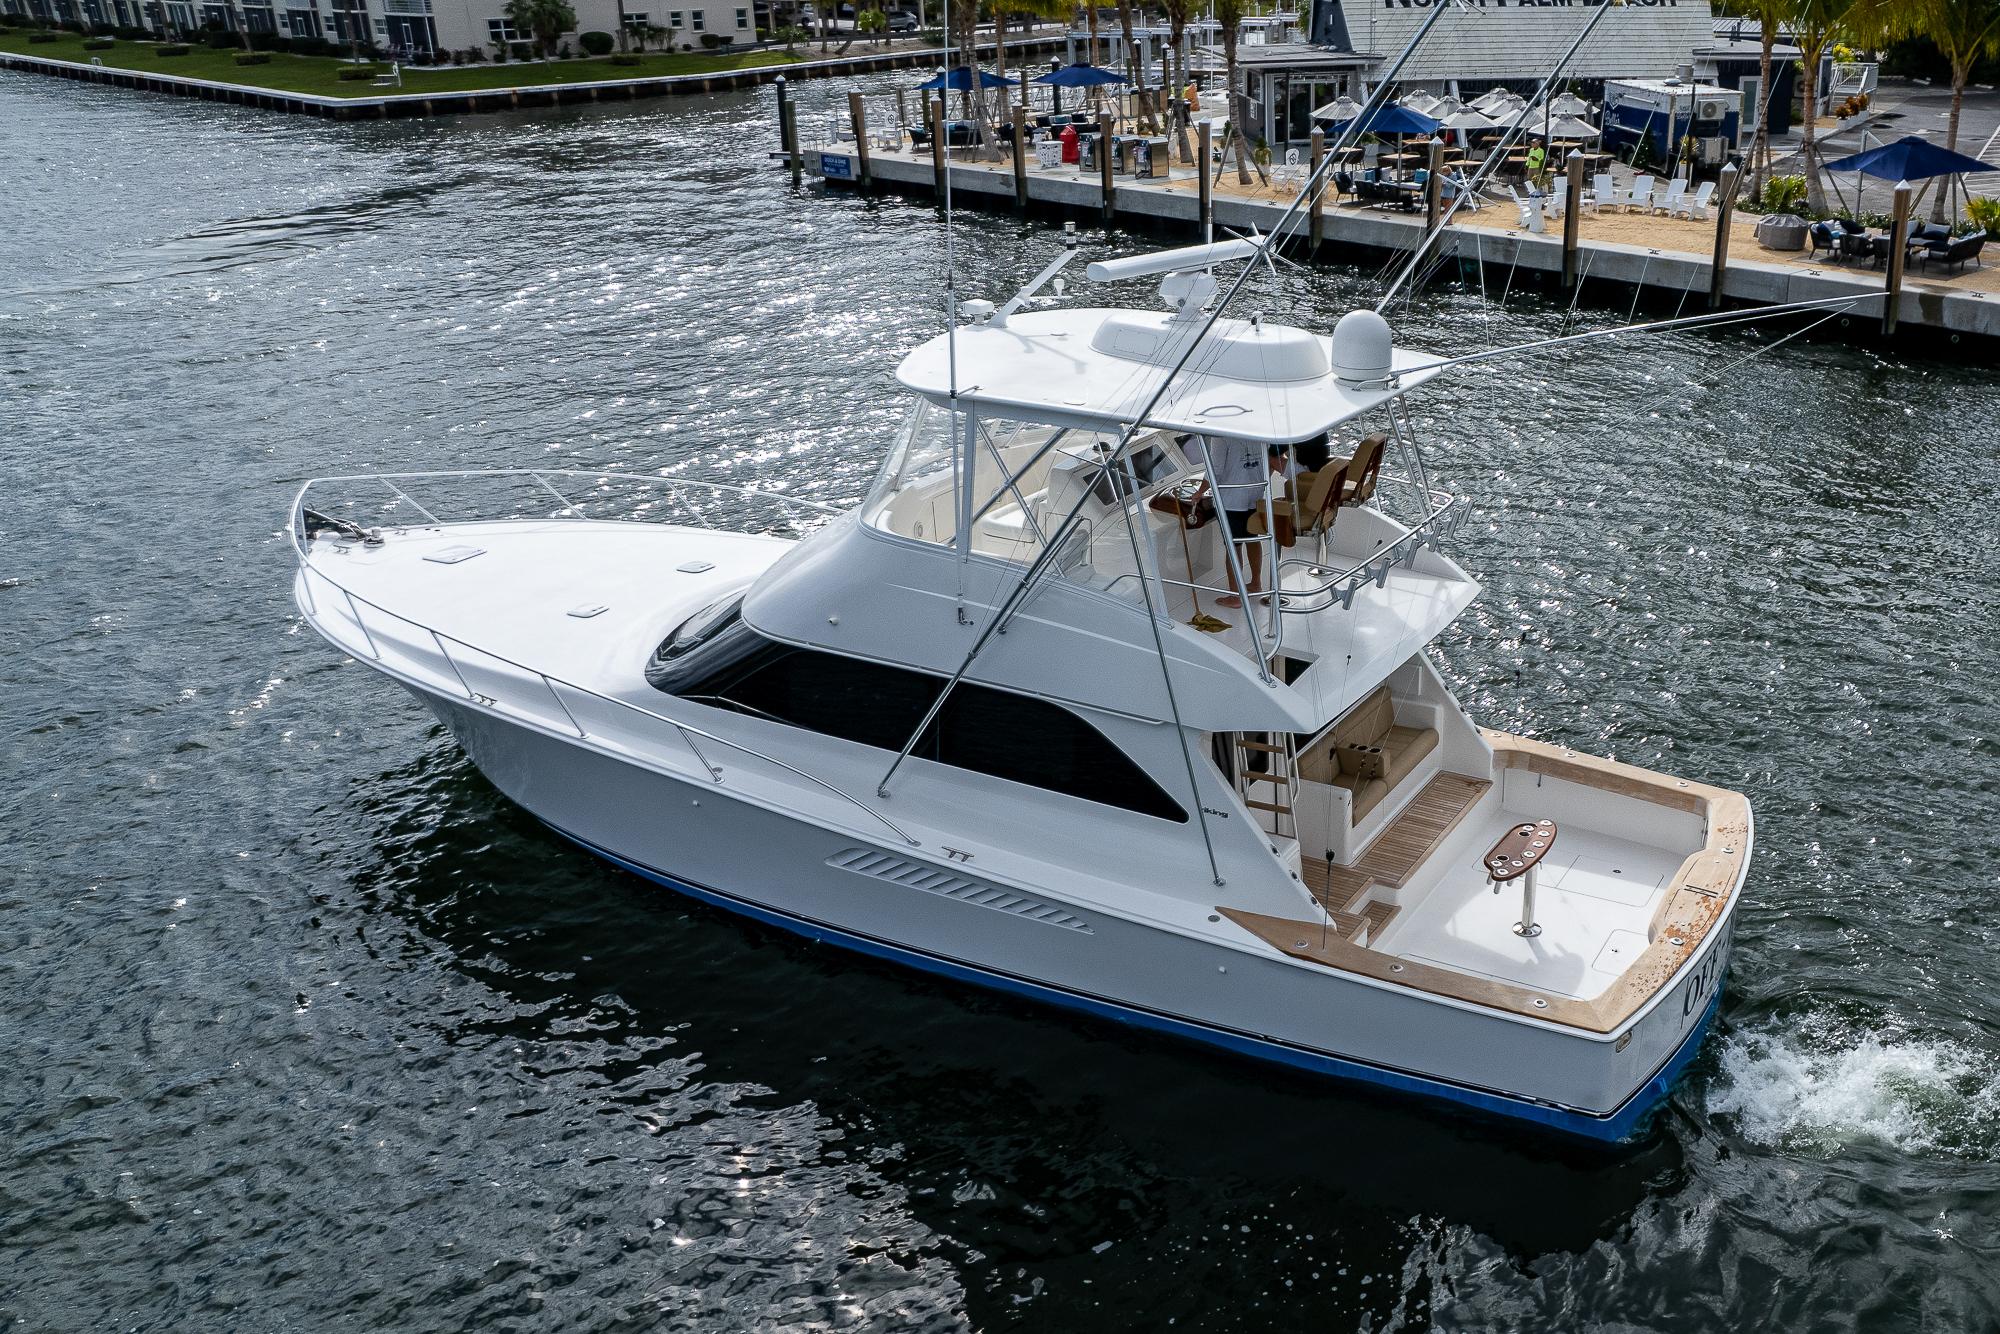 2008 Viking 54 Convertible Yacht For Sale, Off Ice